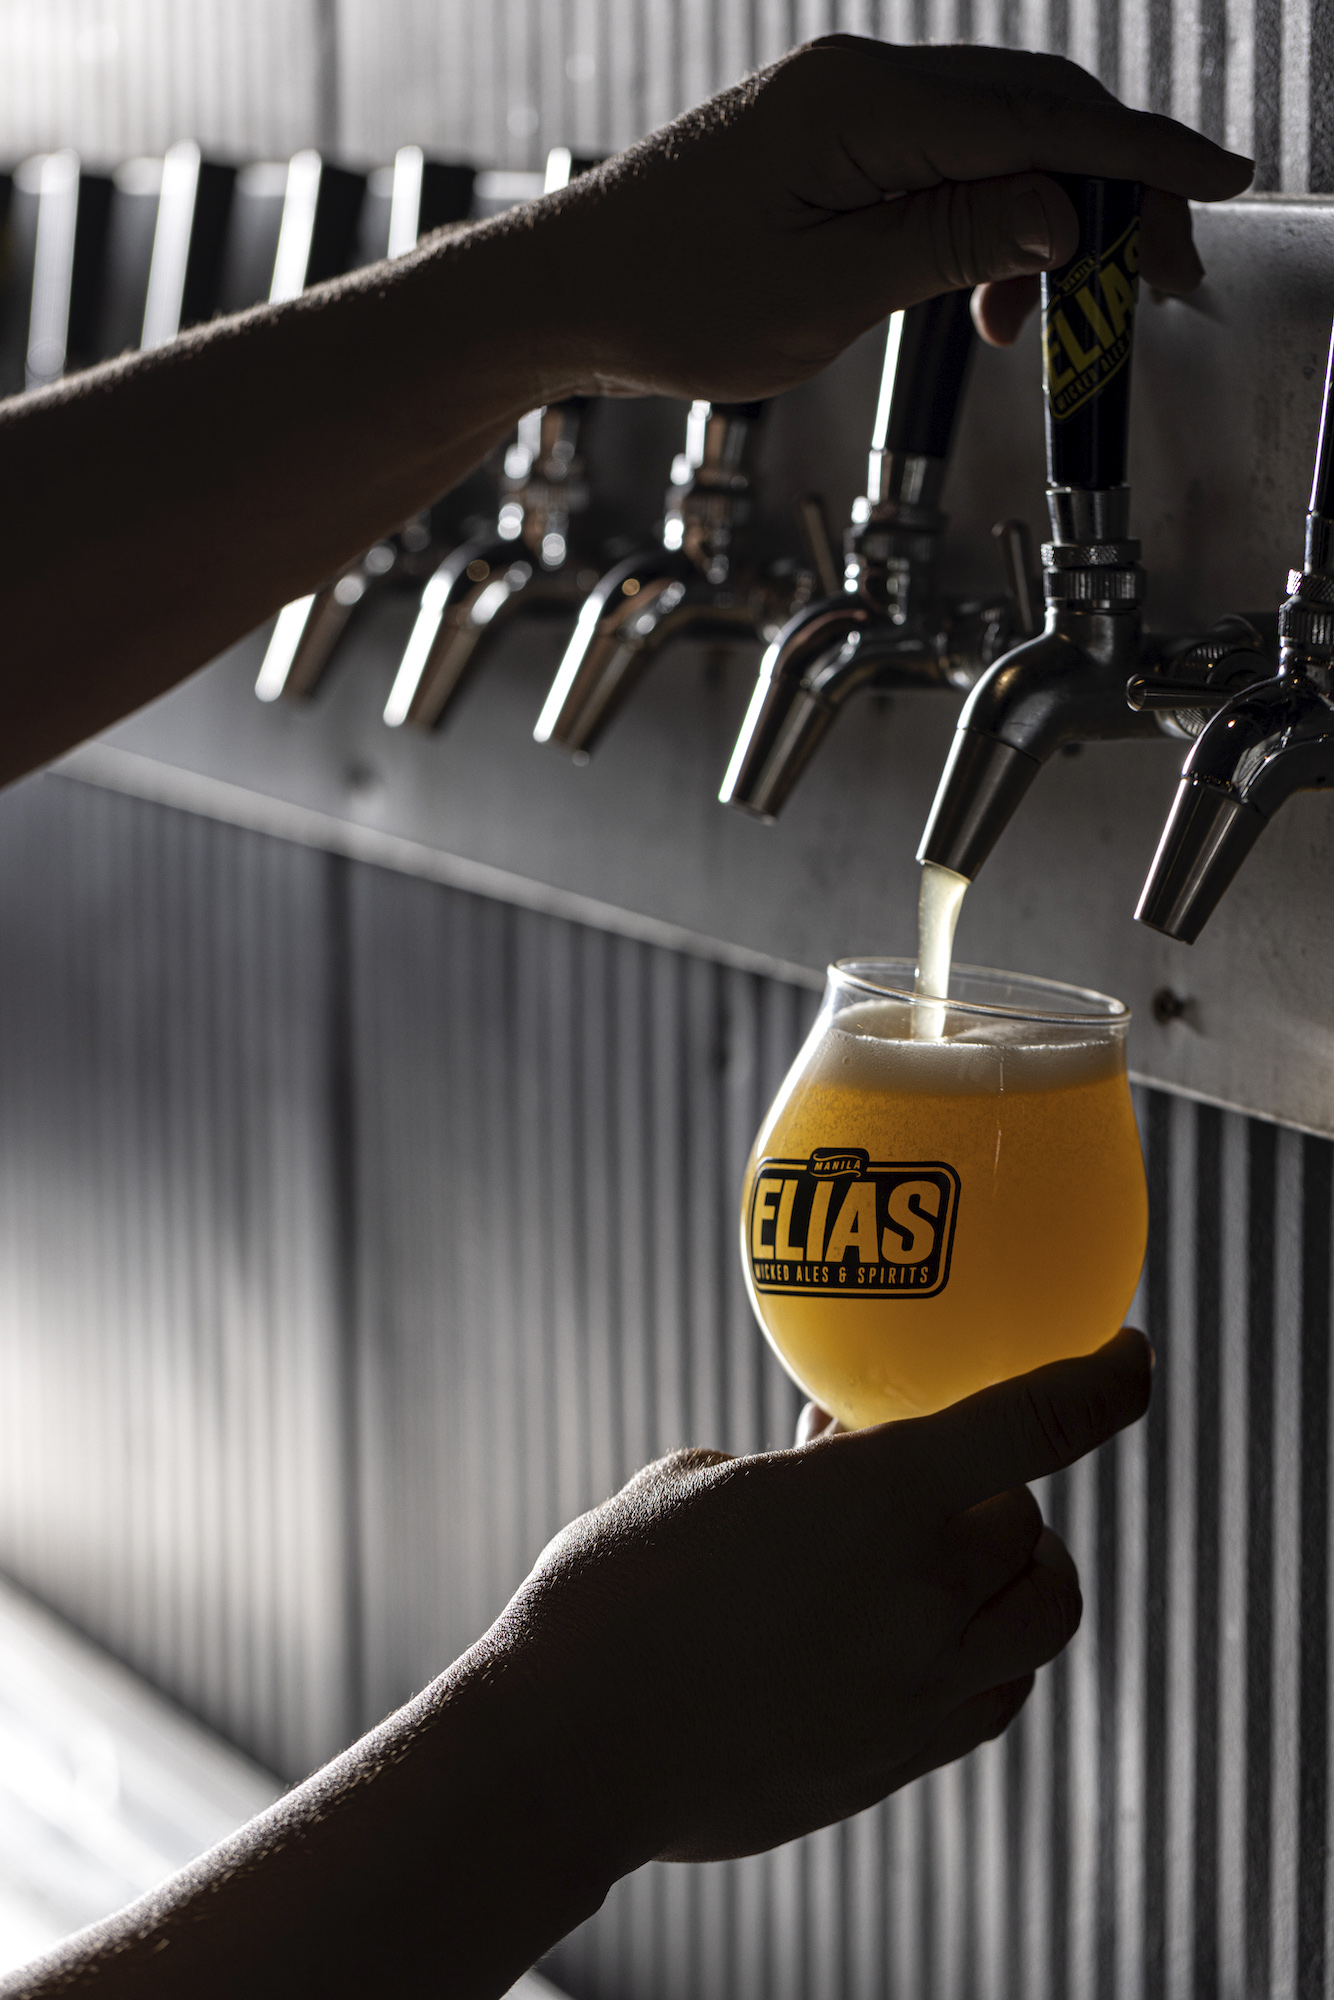 Craft beer is really all about the flavor," says beer sommelier Raoul Masangcay